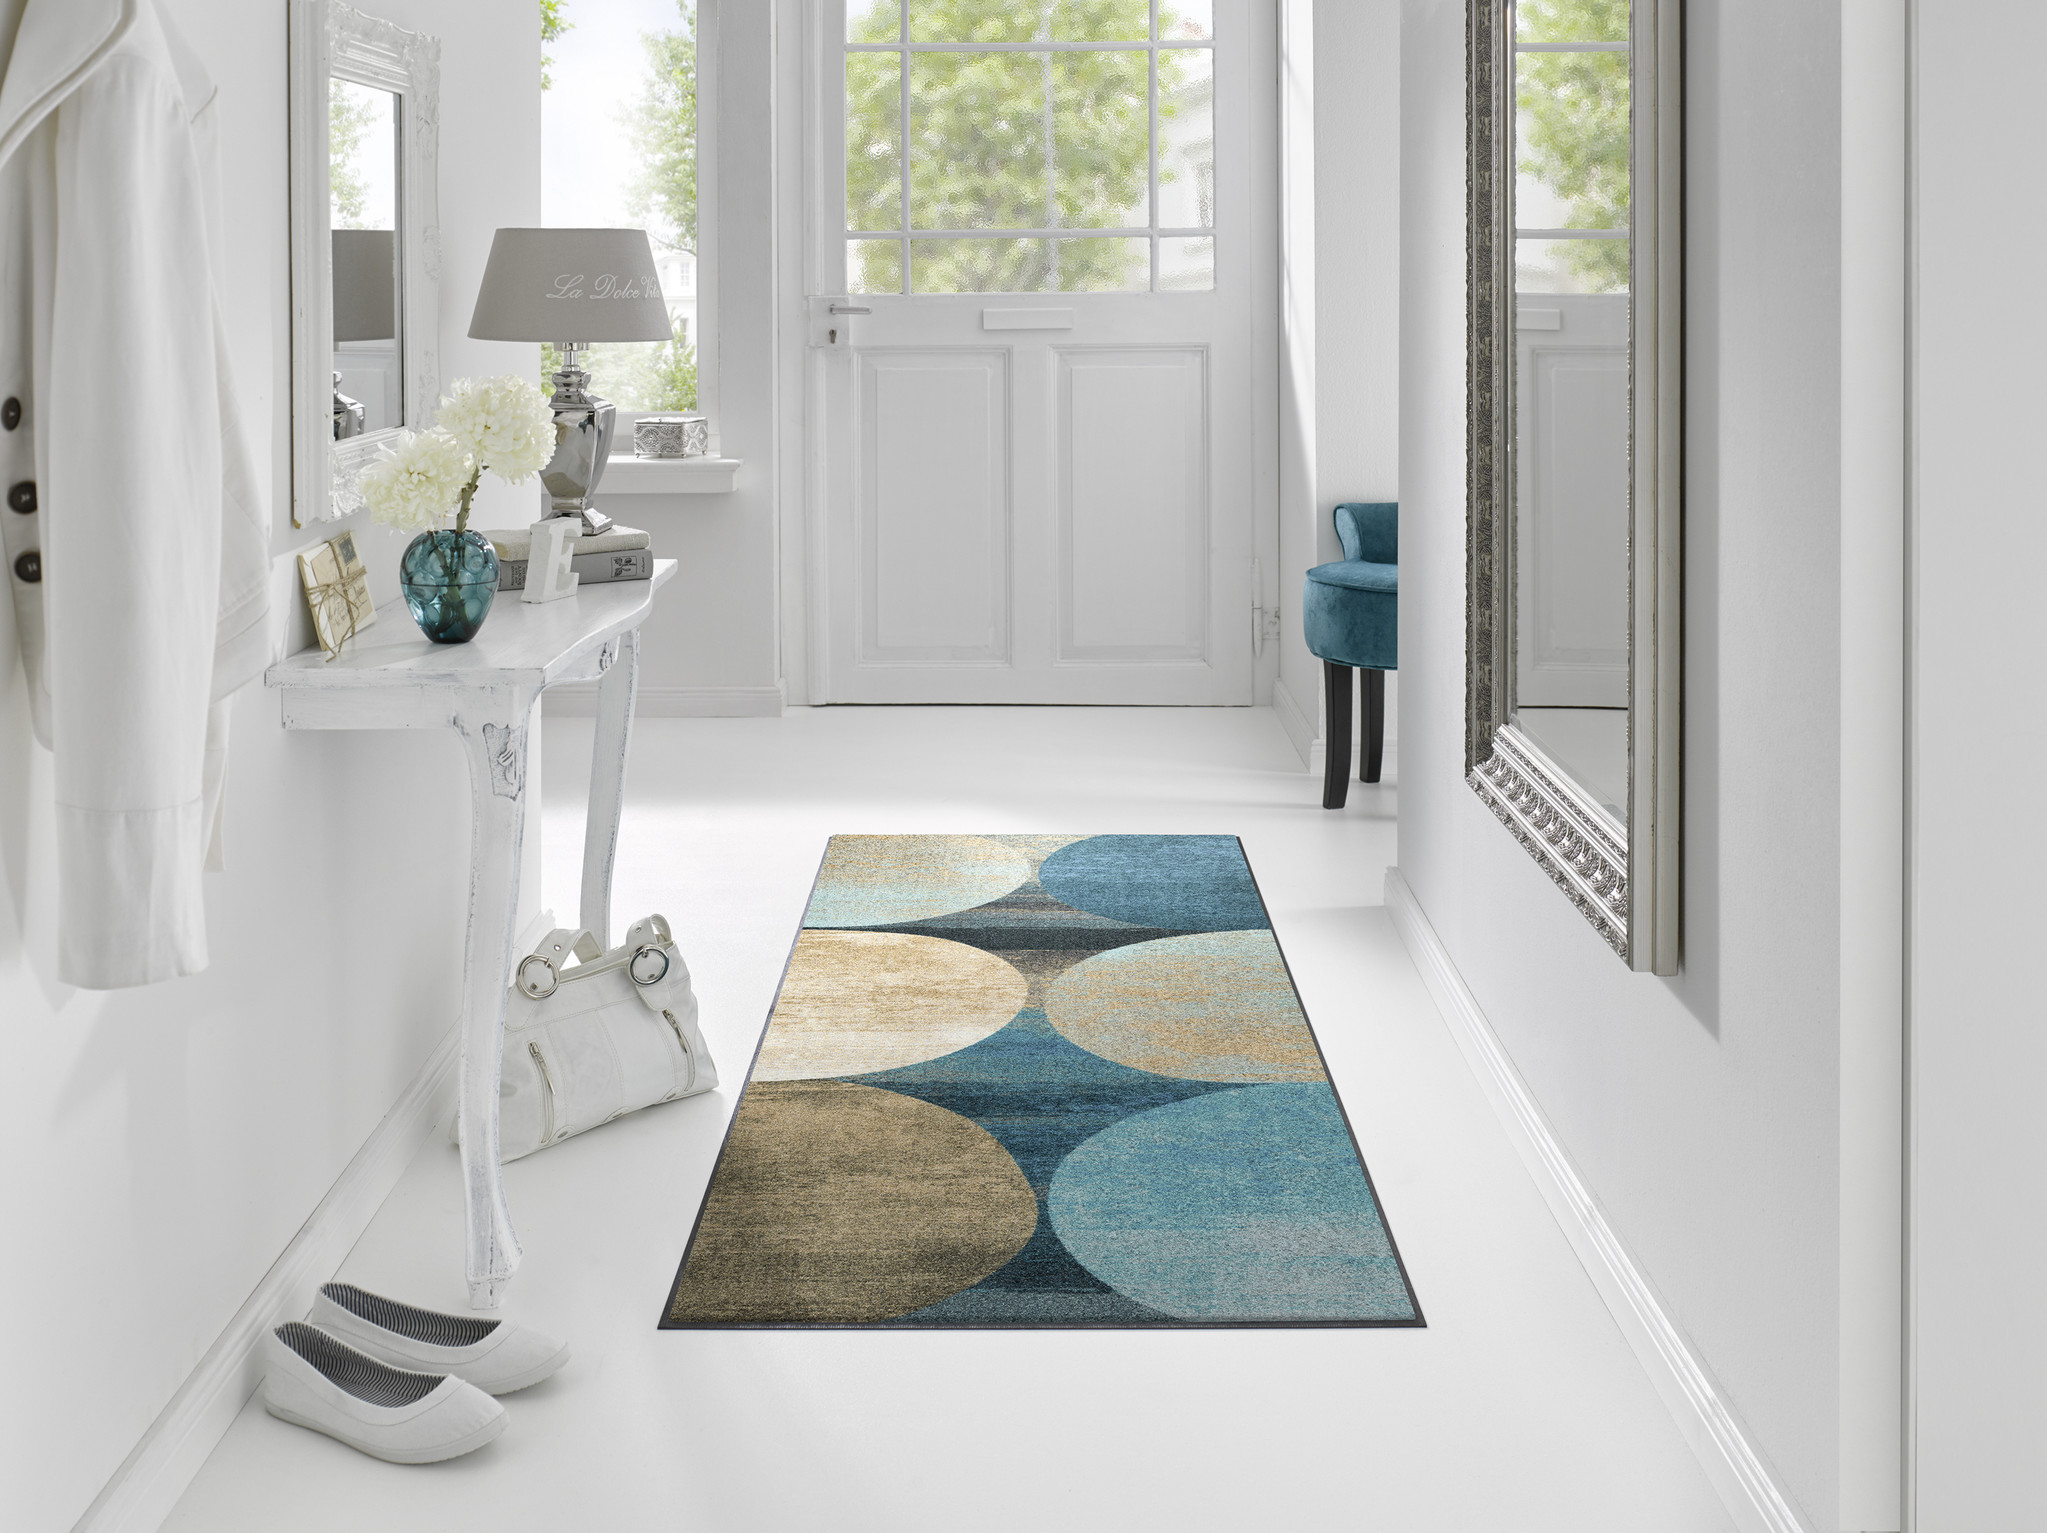 wash + dry Teppich edge! Galaxia washable | Hemsing ... - , doormat | mat rubber